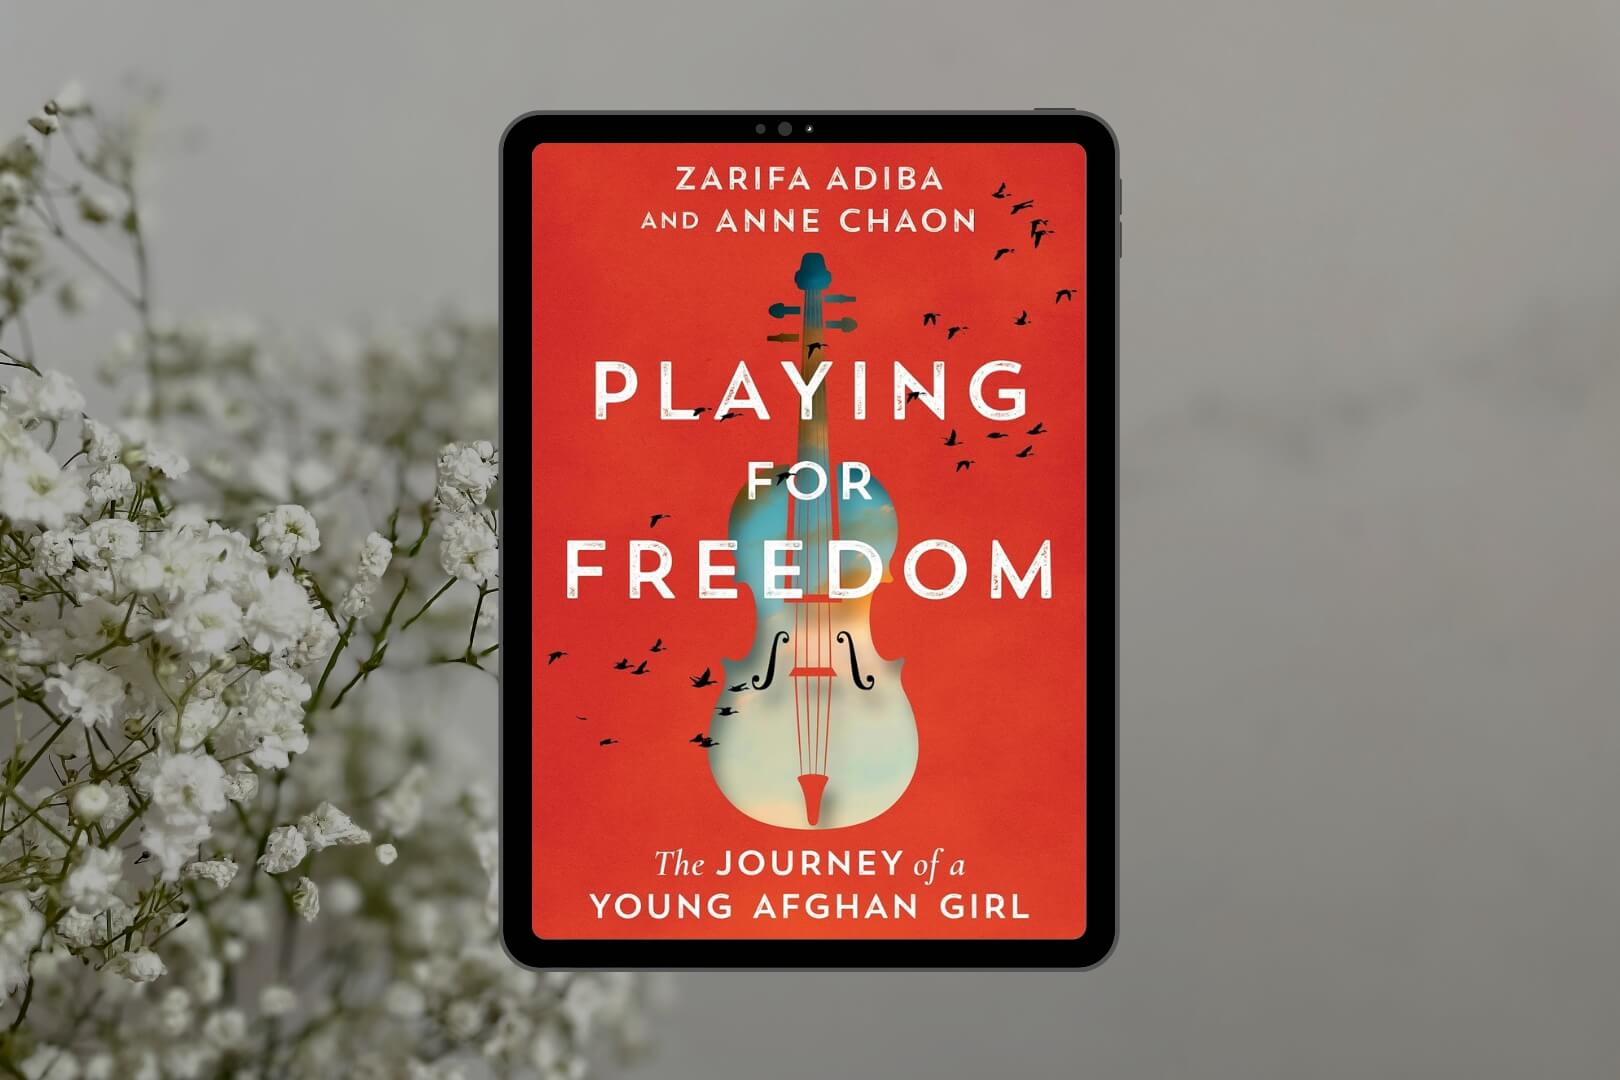 Excerpt from Playing for Freedom by Zarifa Adiba